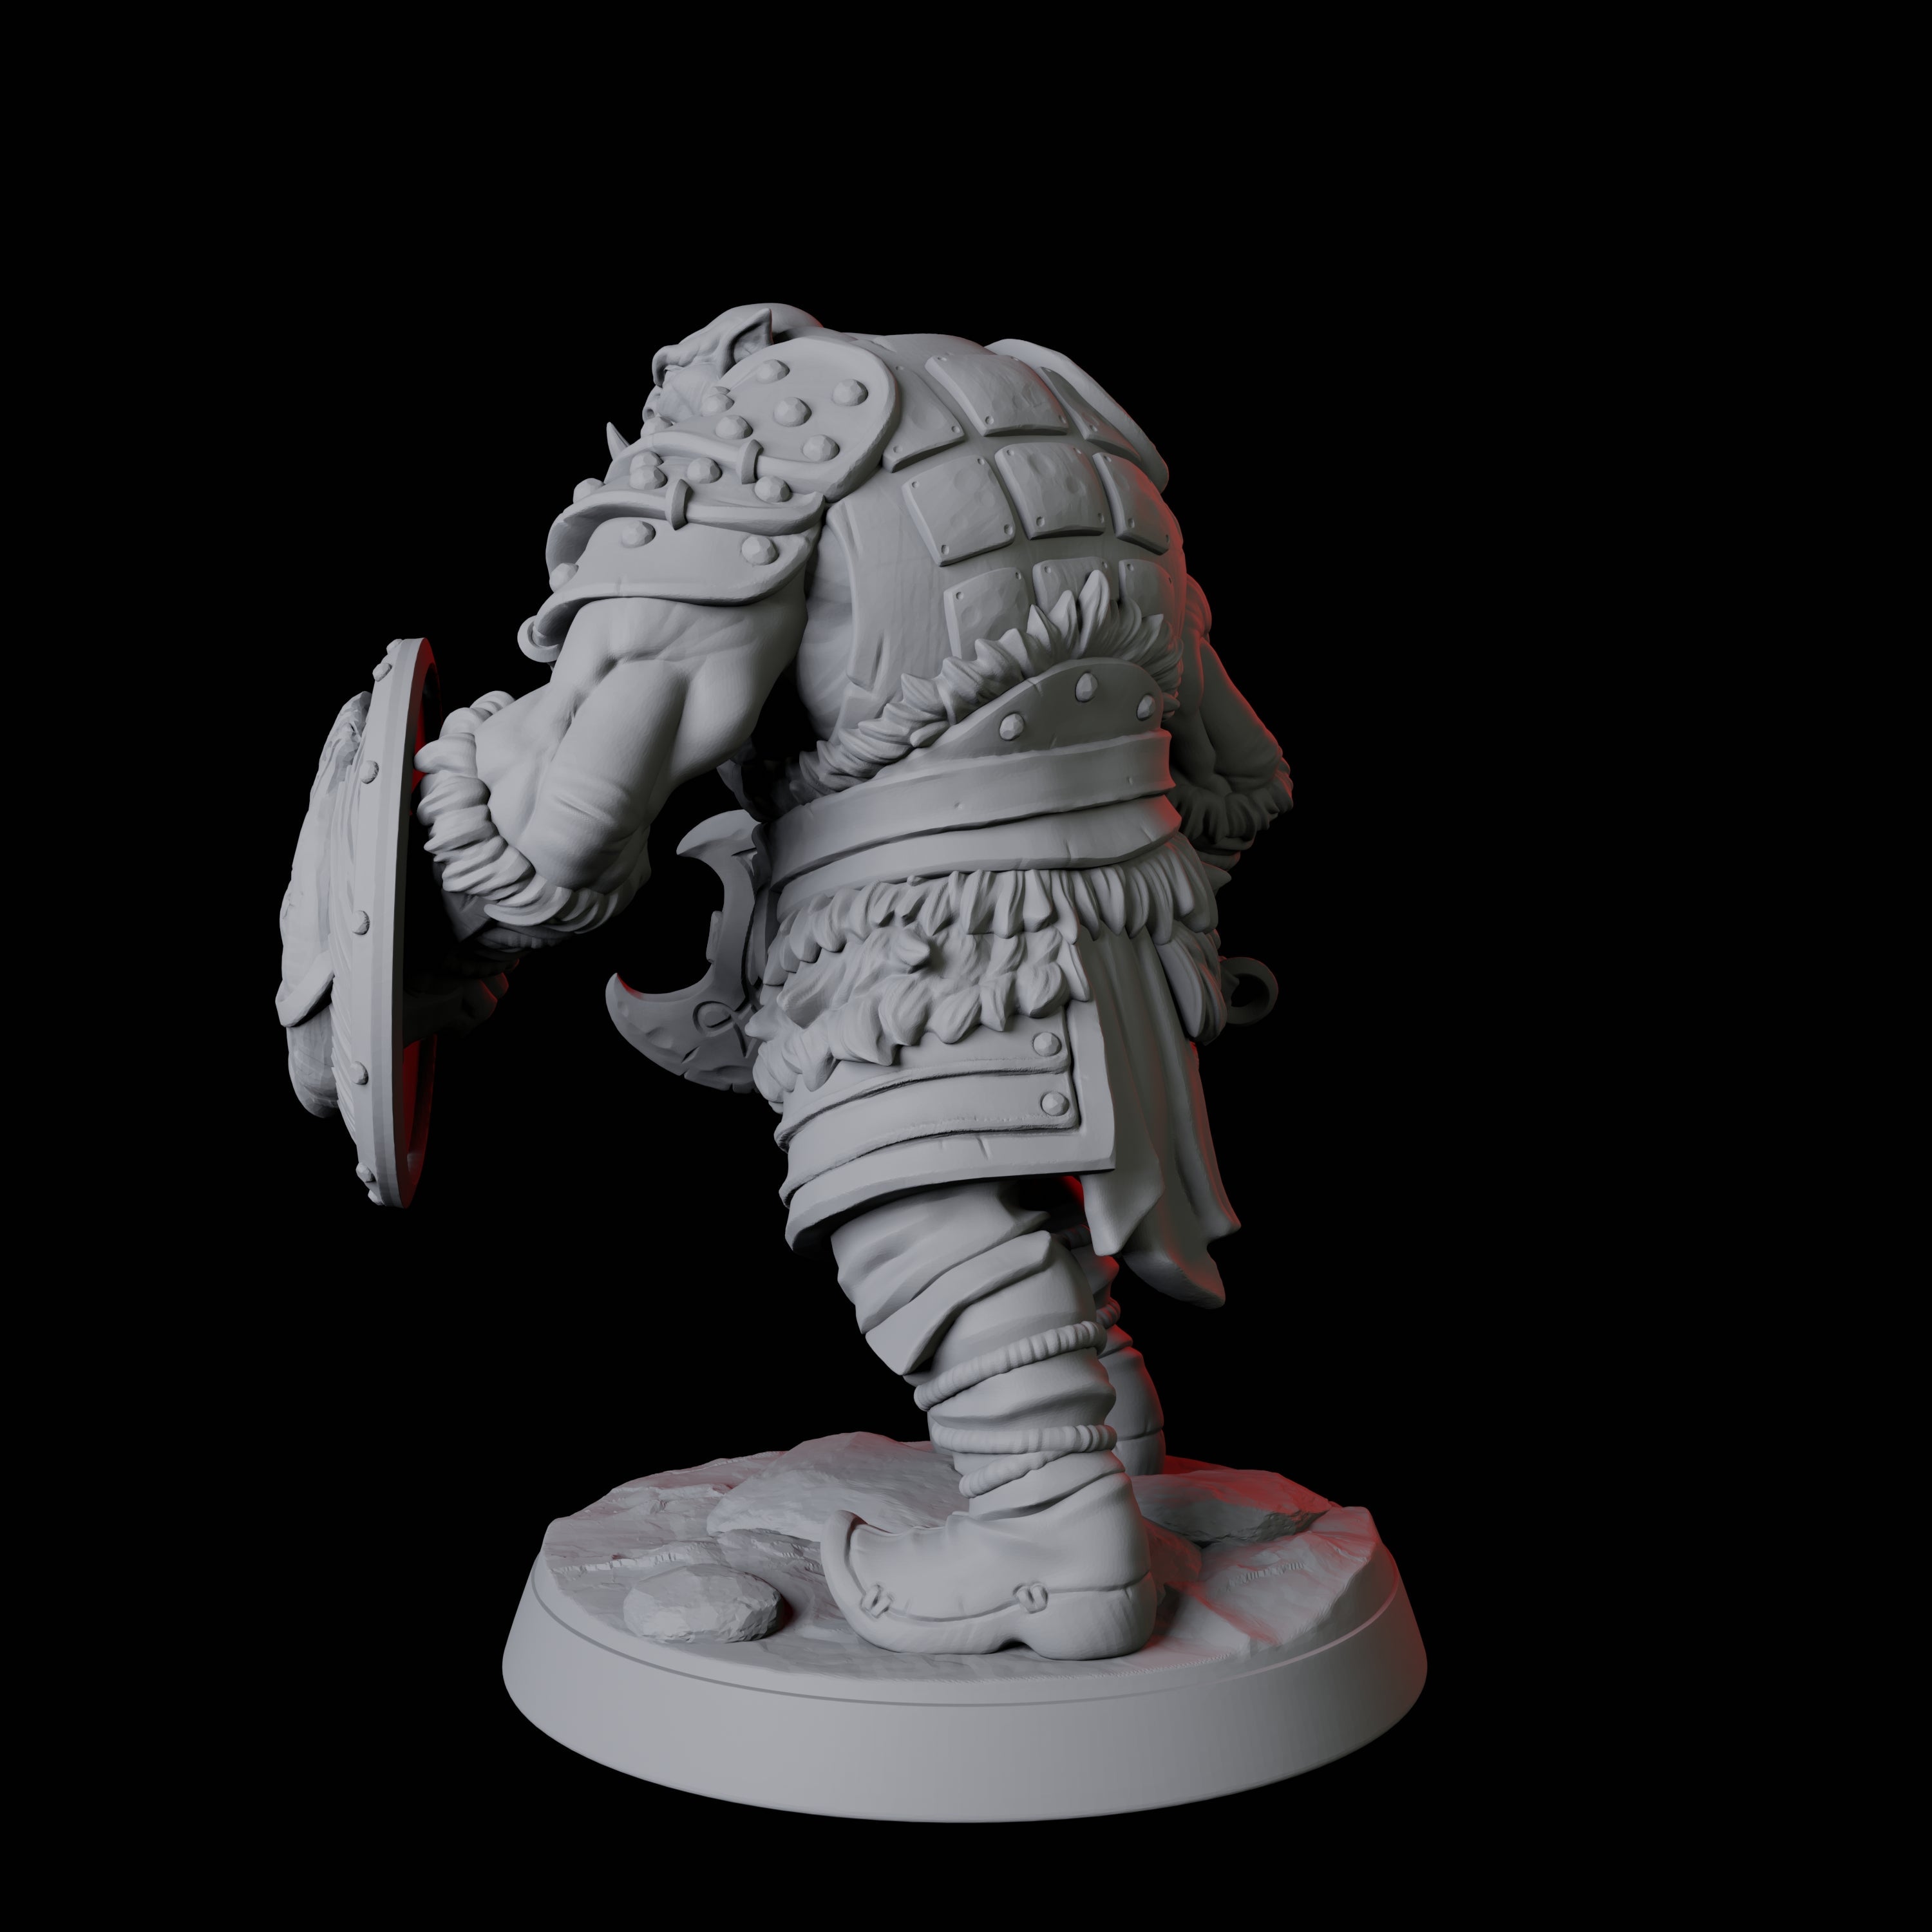 Mountain Orc Warrior A Miniature for Dungeons and Dragons, Pathfinder or other TTRPGs